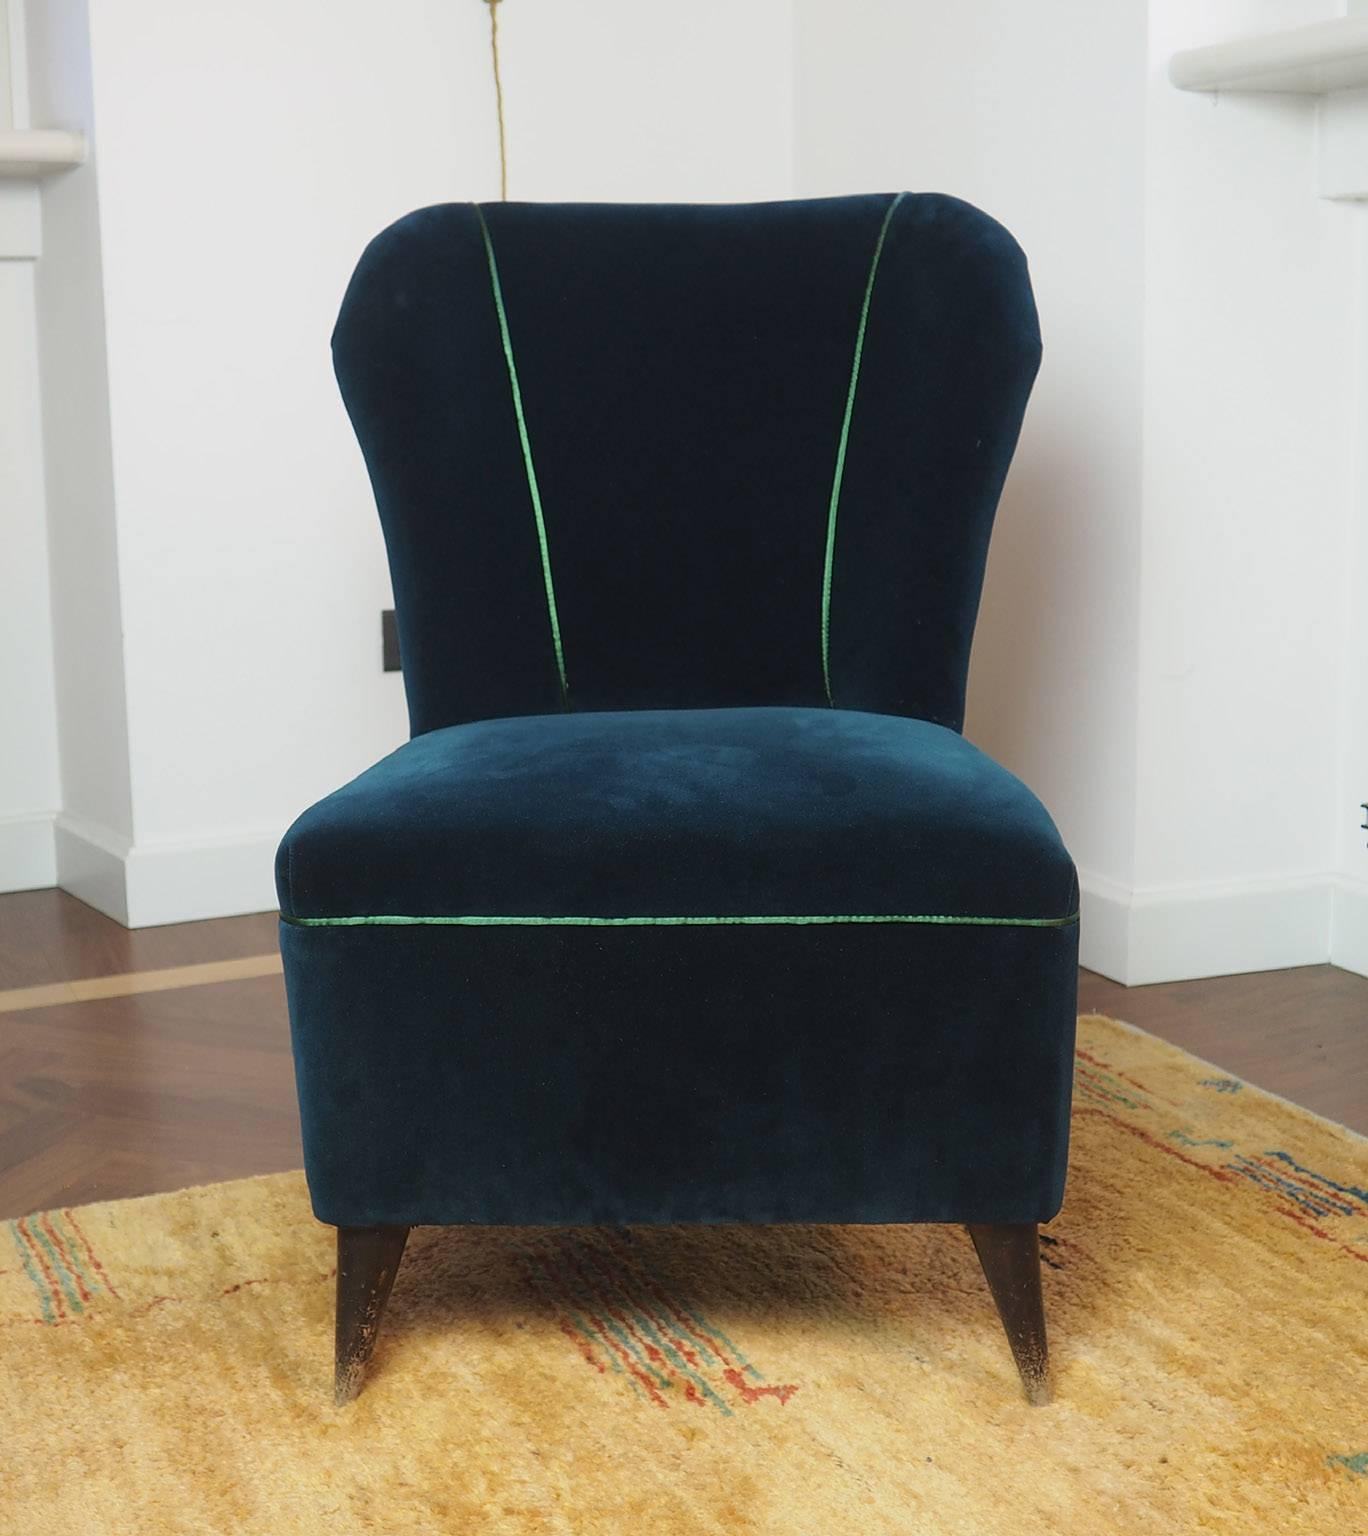 Pair of enchanting armchairs newly upholstered,
covered with elegant green 